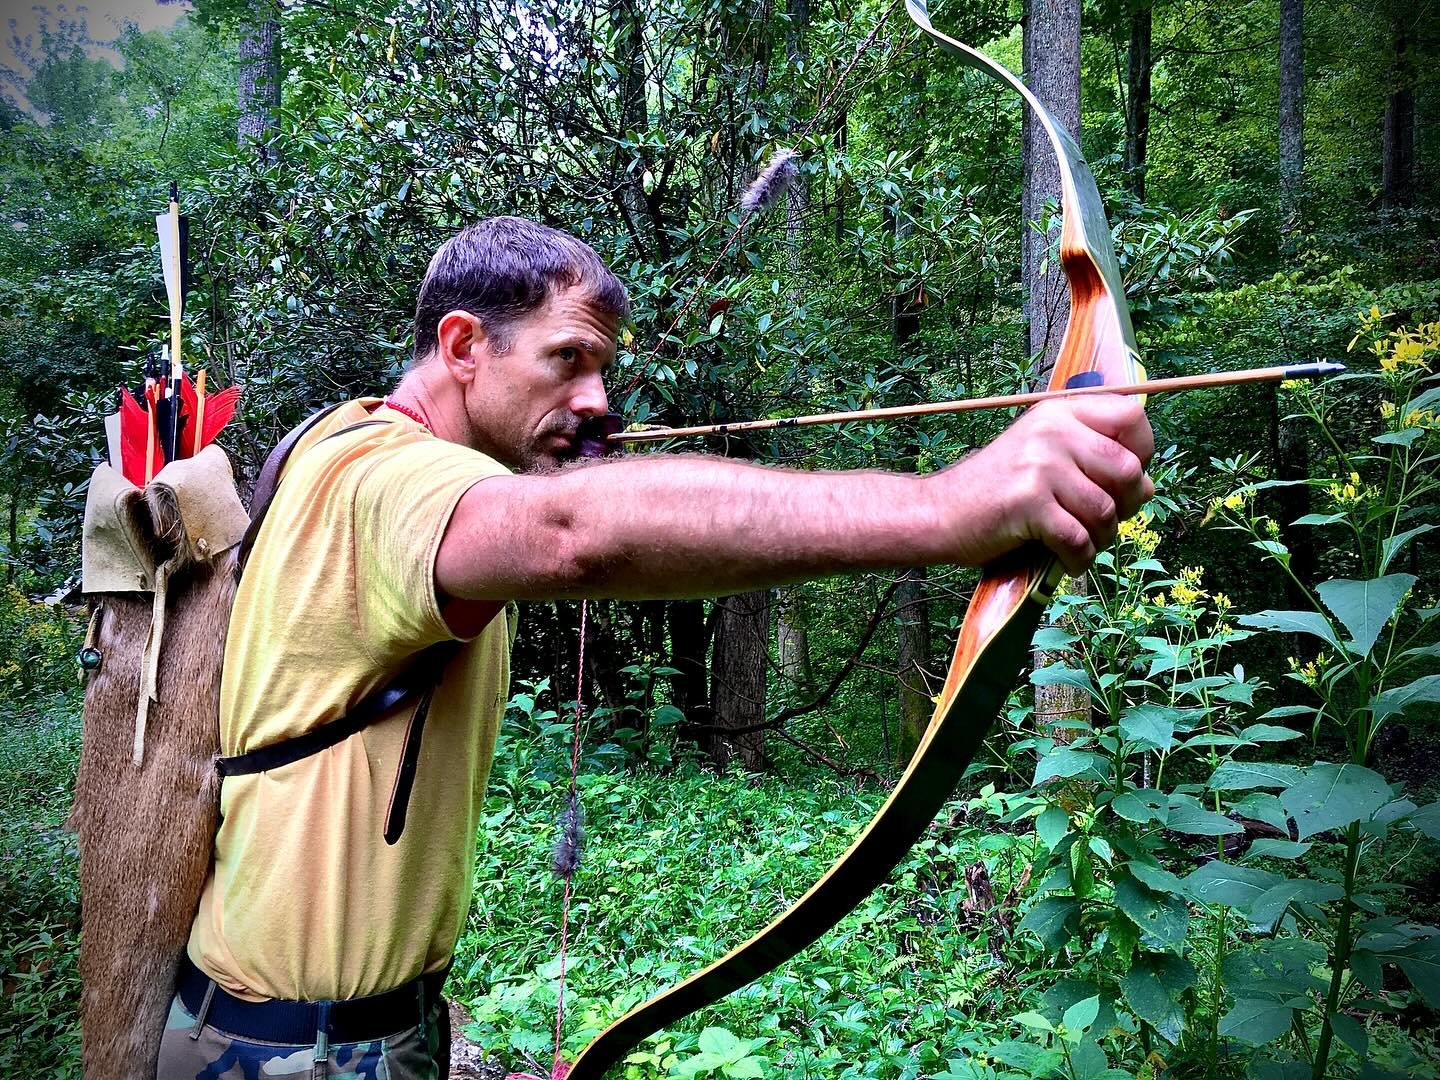 Getting things together to head to the Rivercane Earthskills Rendezvous for a few days. Teaching traditional archery and blending &amp; flowing with your surroundings. Should be lots of fun. As always, looking forward to connecting with old friends, 